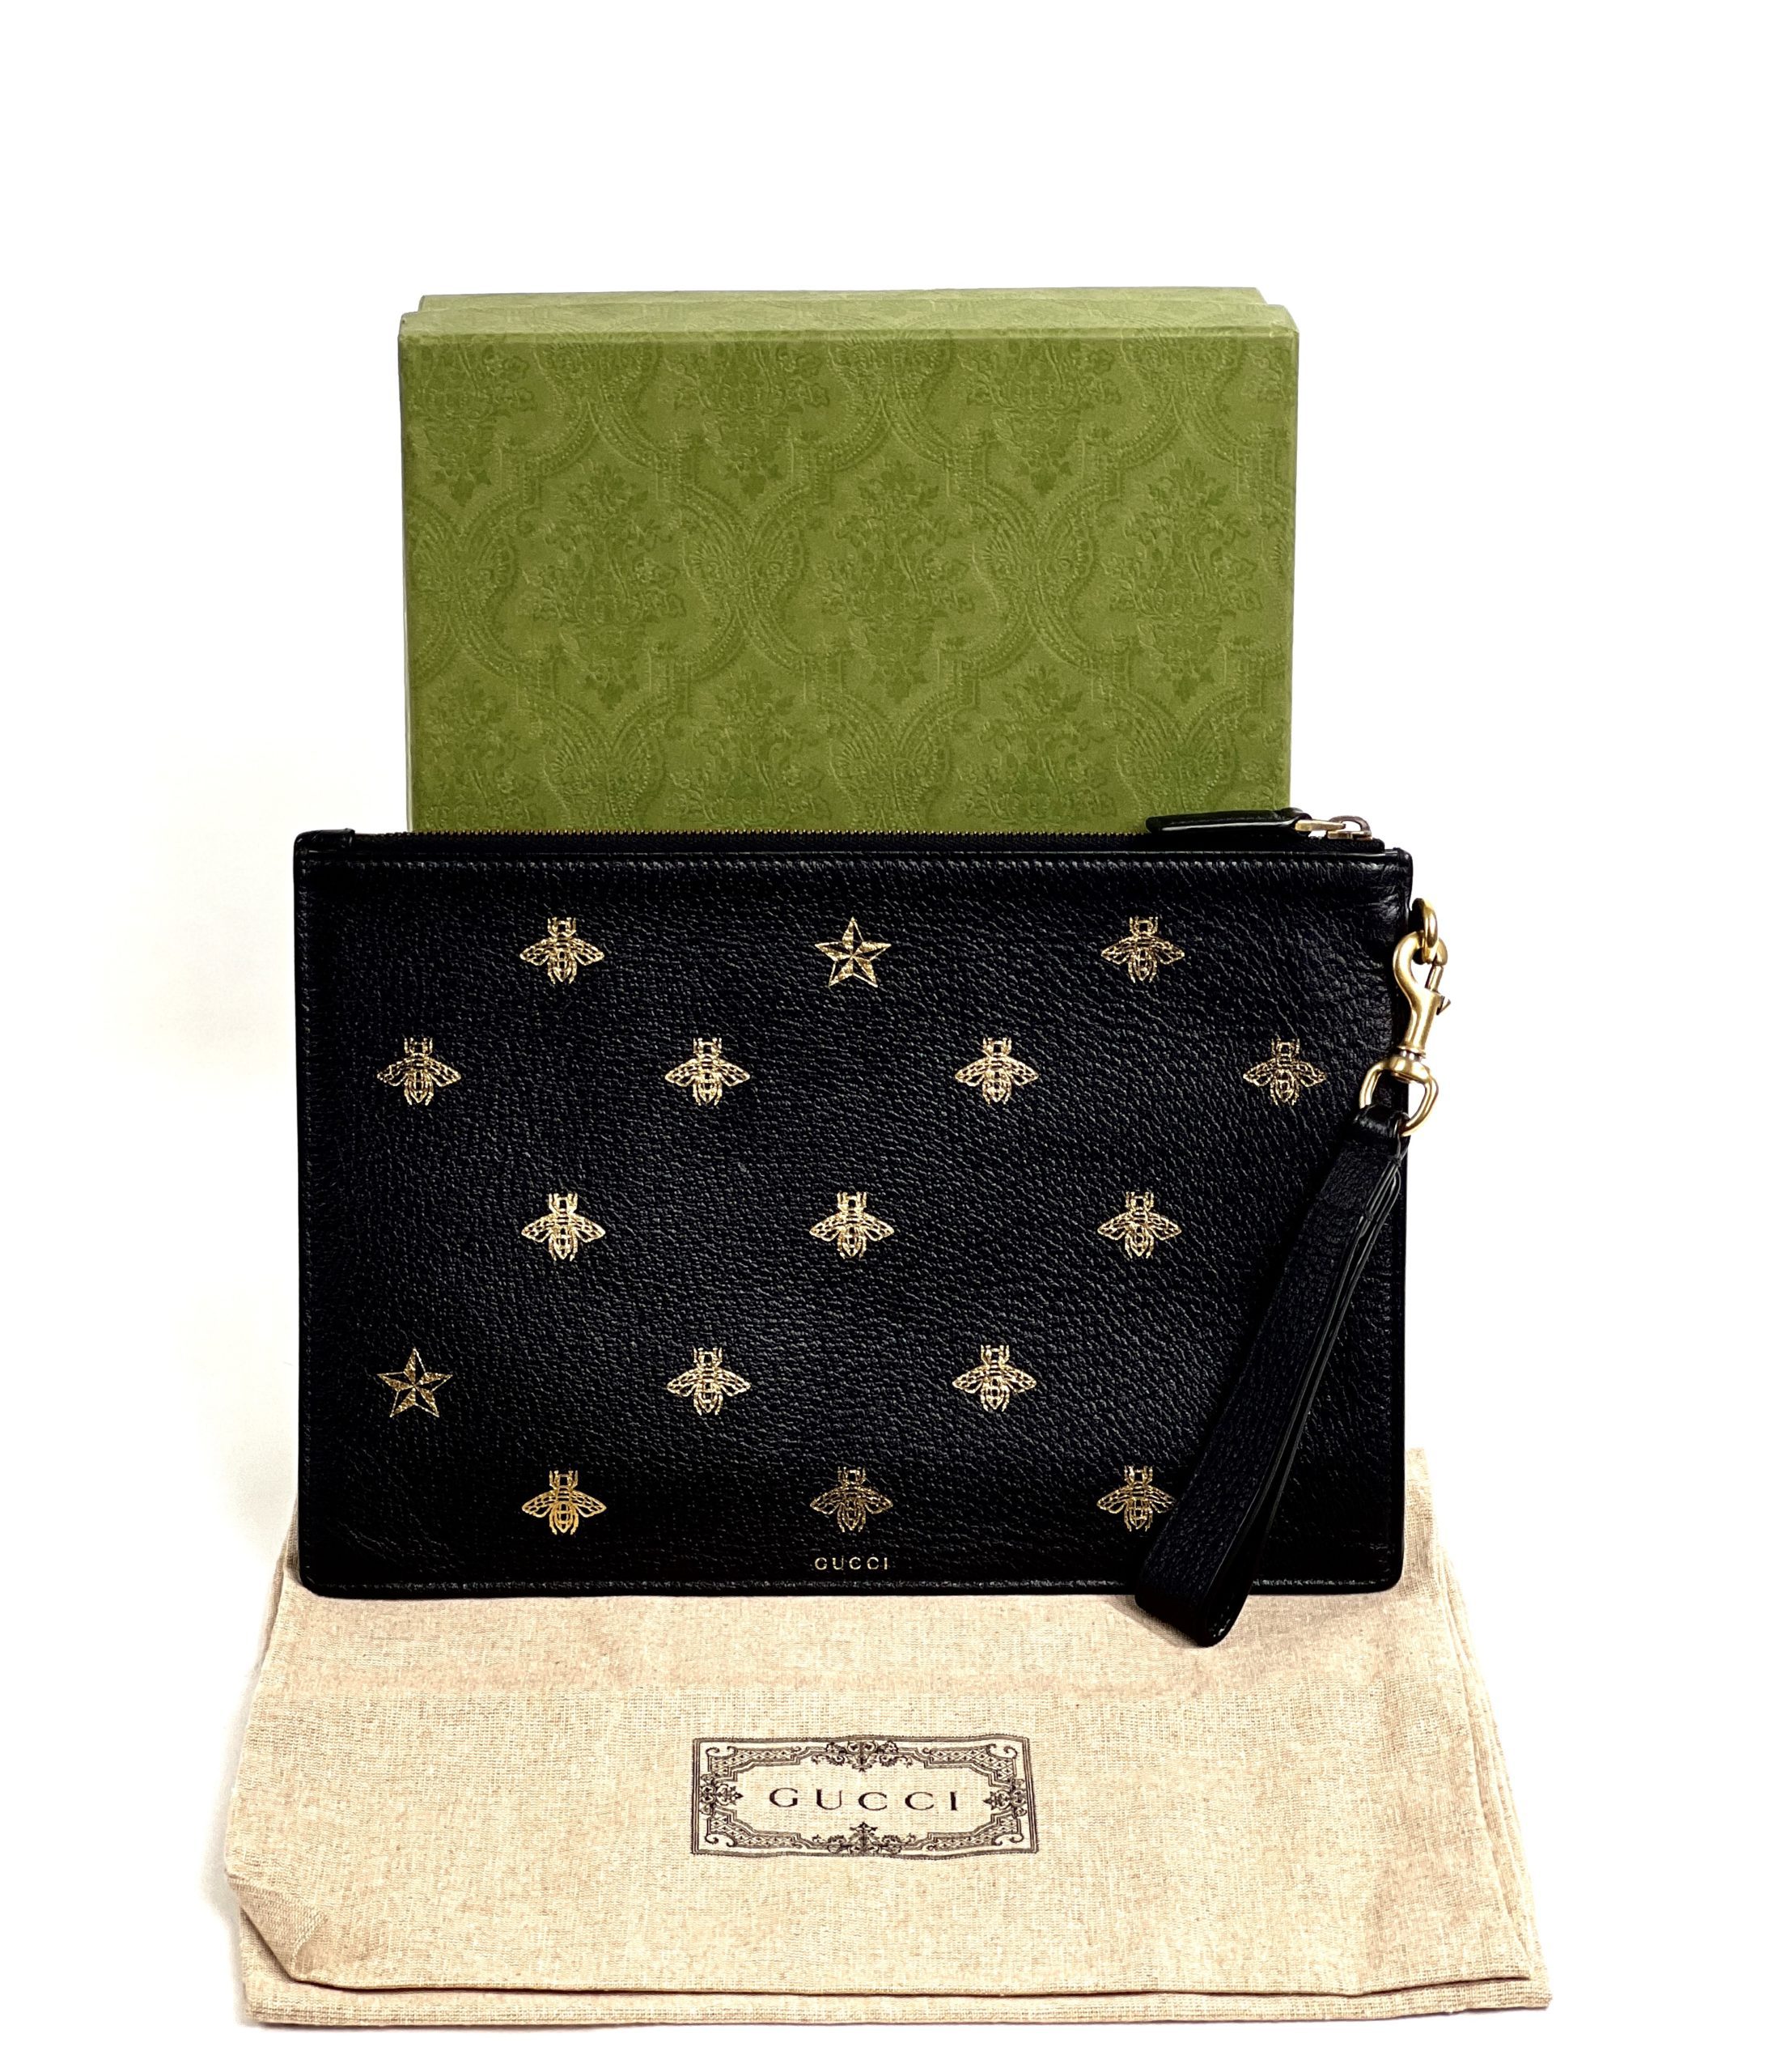 Gucci Animalier Bee Embroidered Pouch Clutch Bag Black Leather